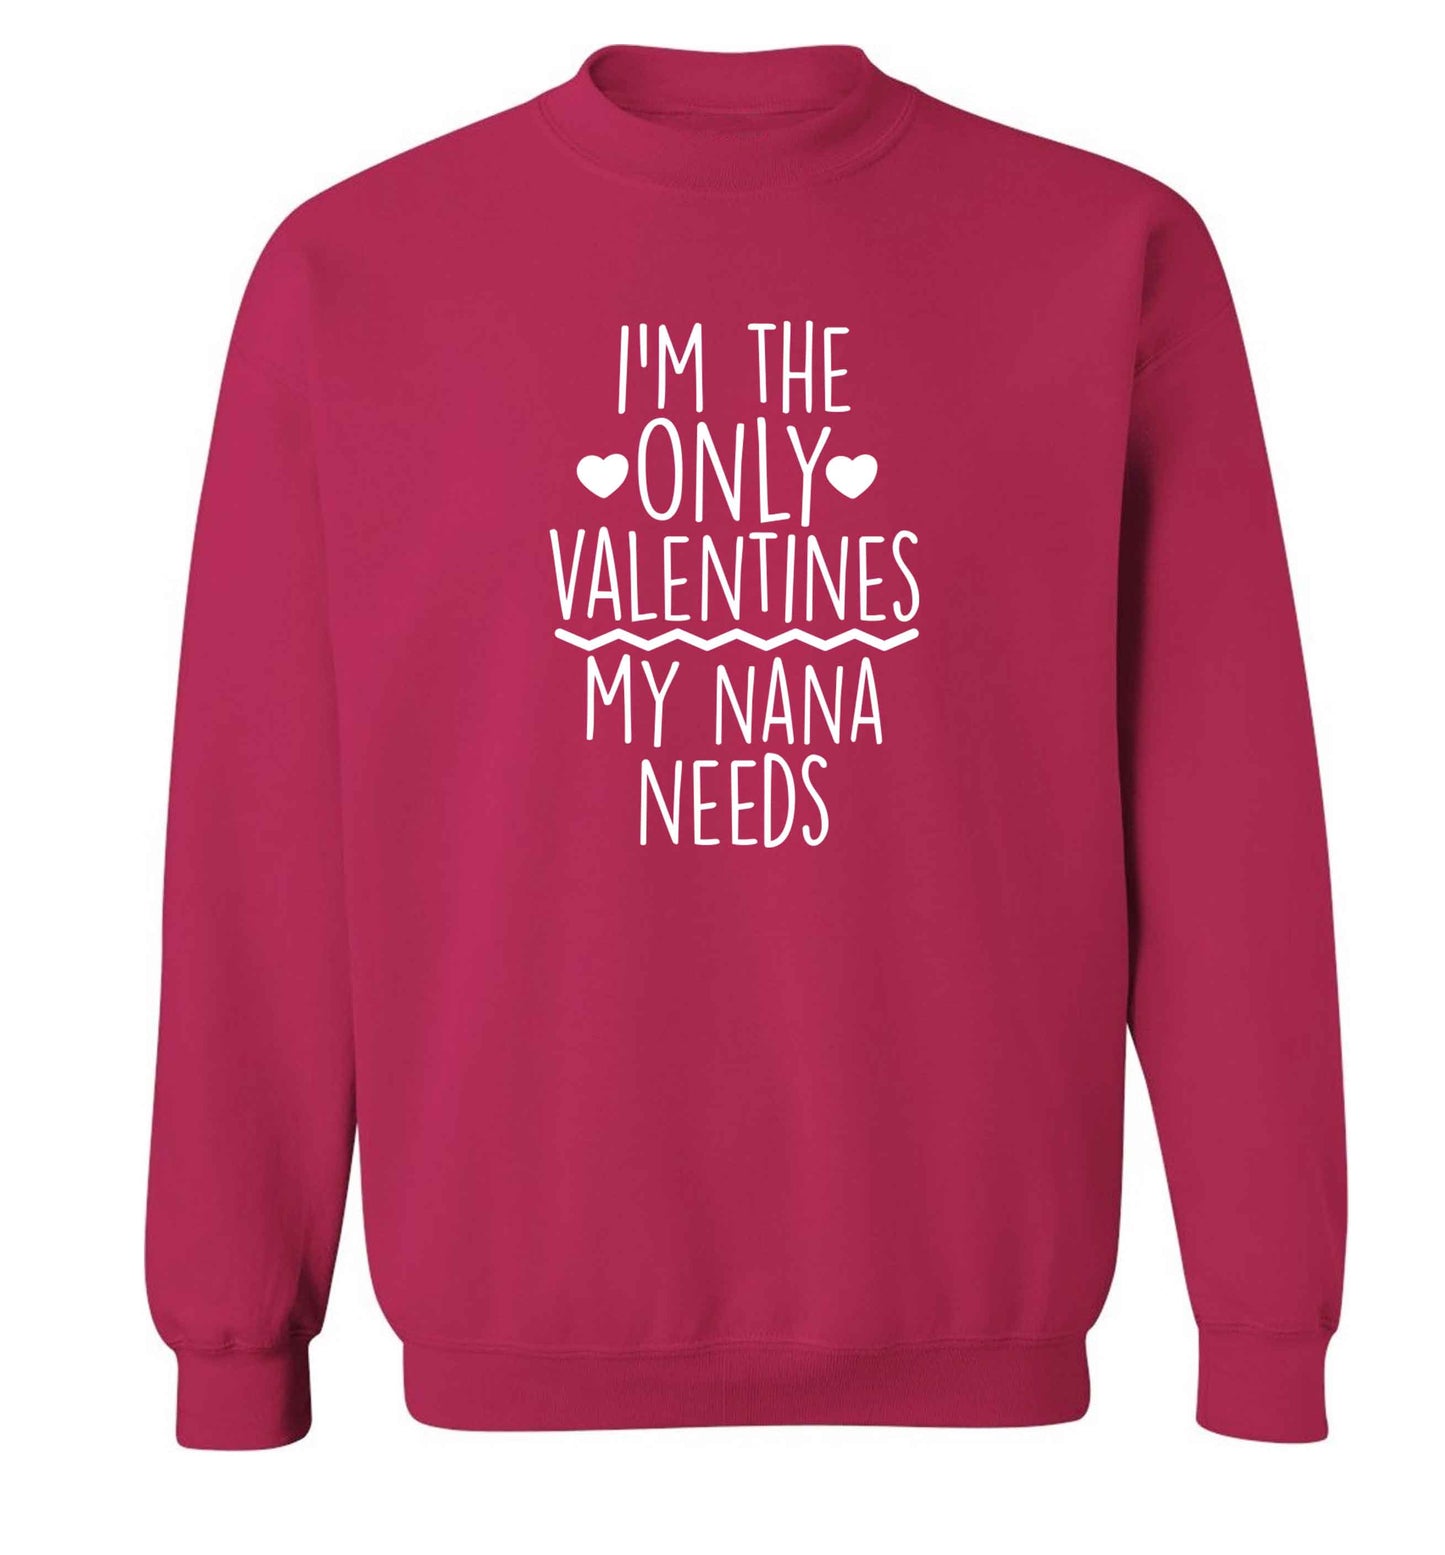 I'm the only valentines my nana needs adult's unisex pink sweater 2XL